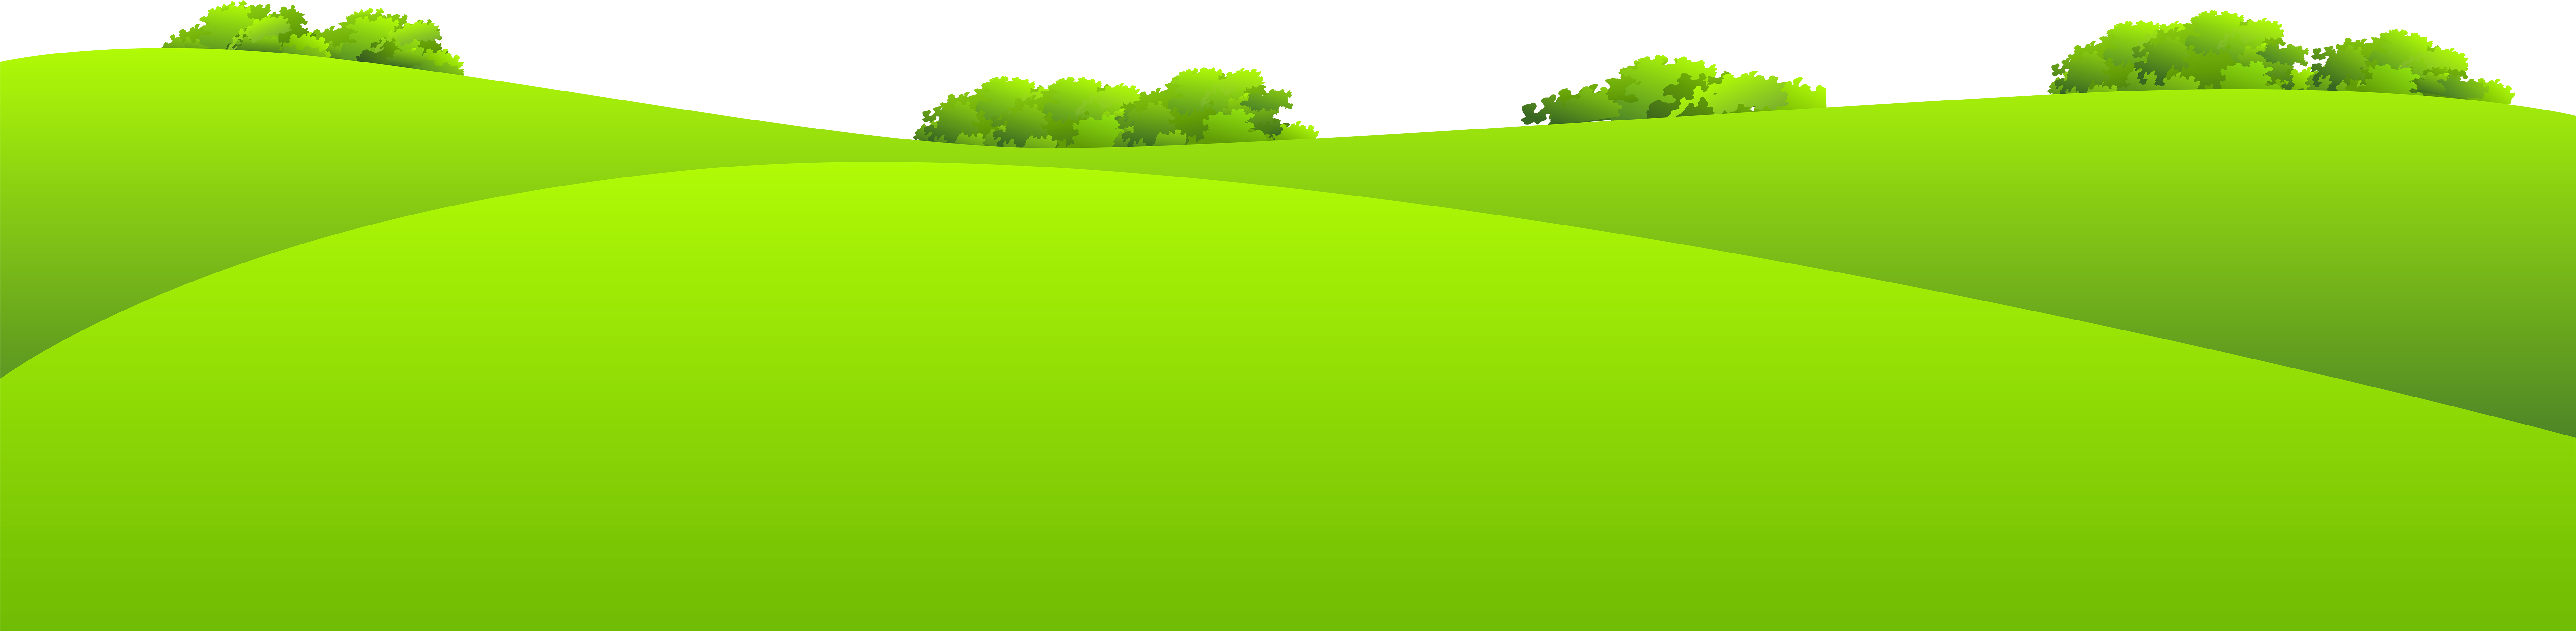 Vibrant Green Hills Meadow PNG image